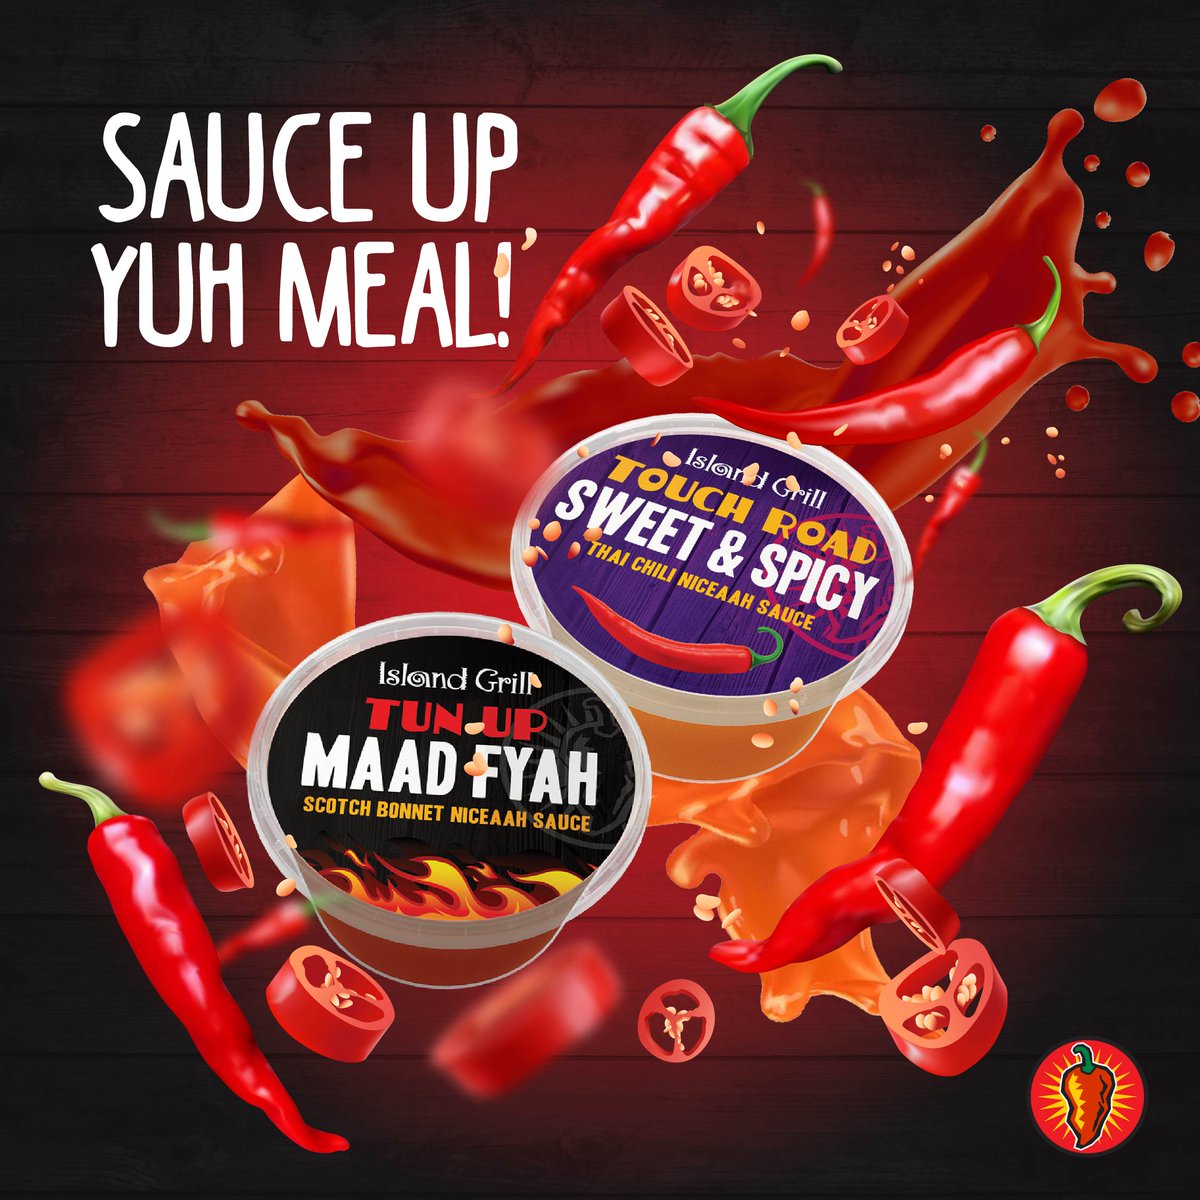 Sauce up yuh meal, and let the flavour vibes begin! 🌶️🍴🎉
#EatGoodLiveGood #IslandGrill #TasteTheMagic #FlavourExplosion #SaucyDelights